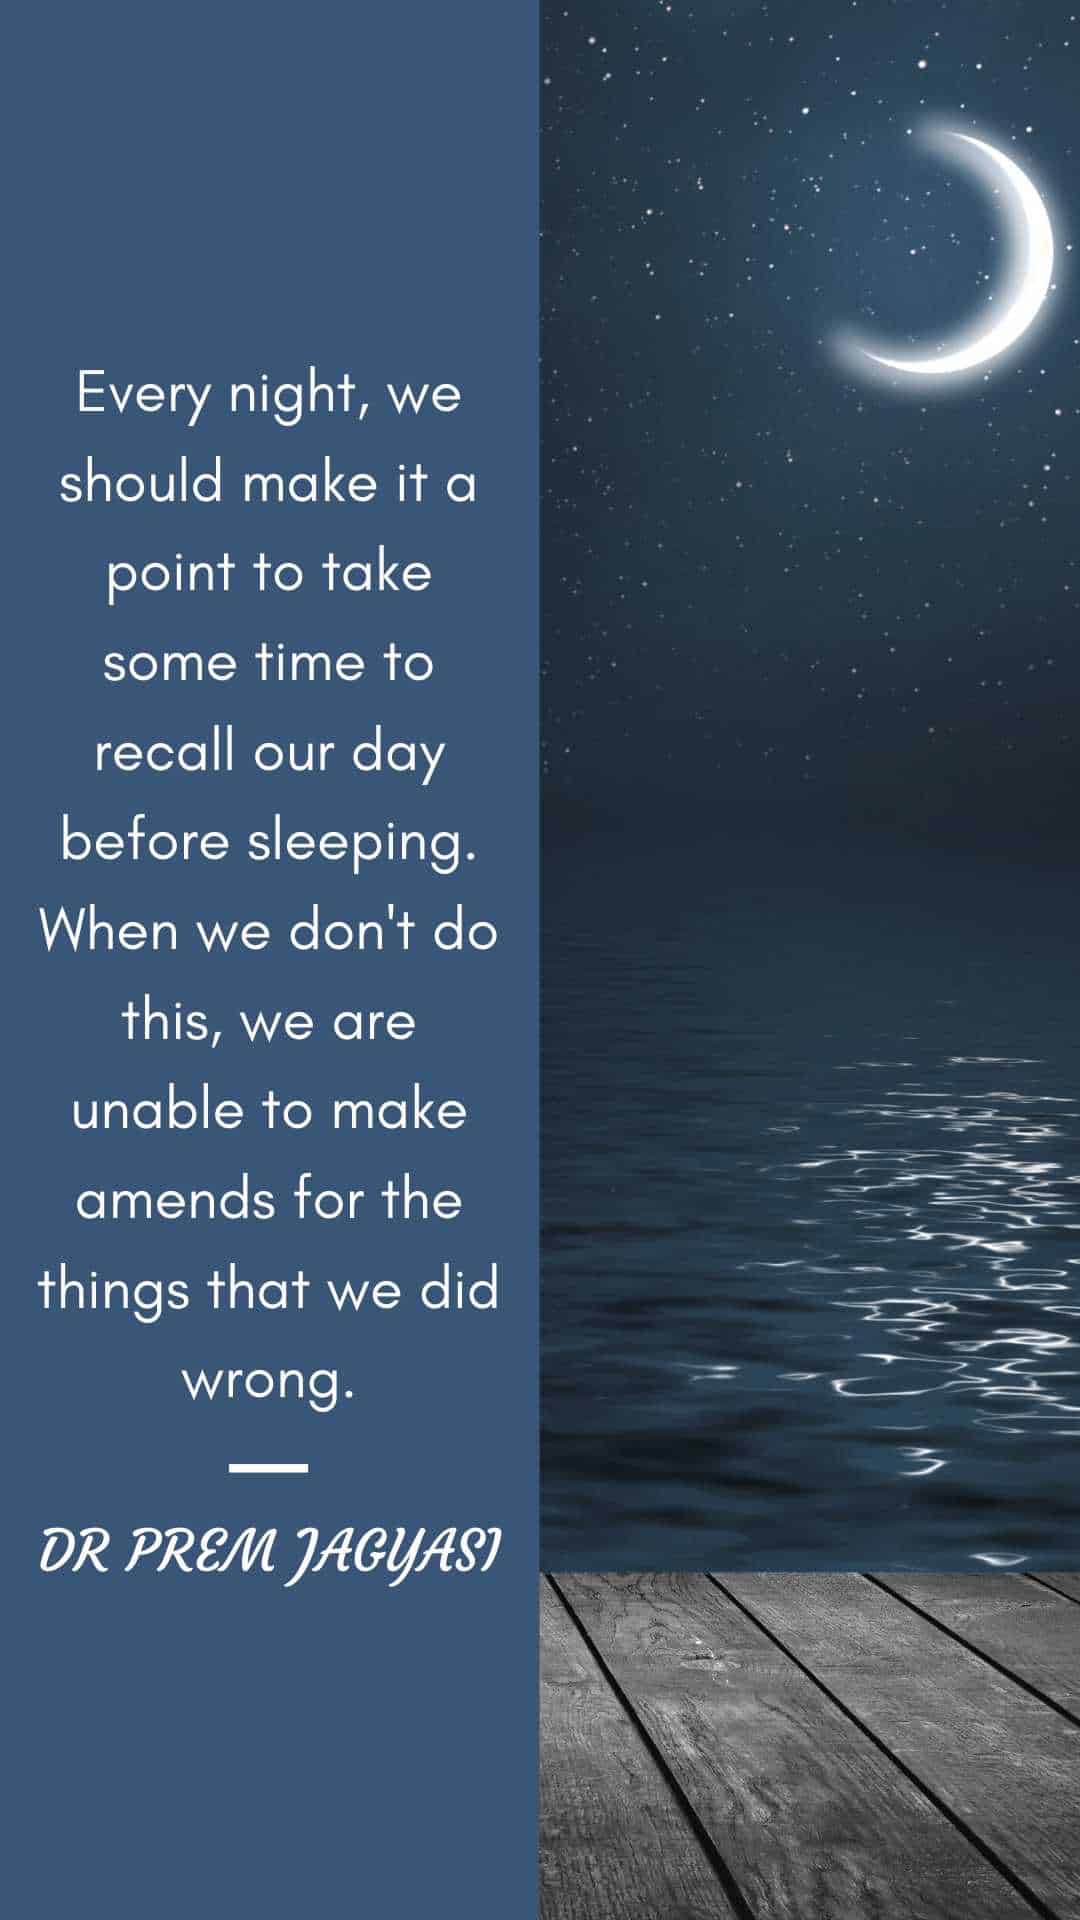 Every night, we should make it a point to take sometime to recall our day before sleeping. When we don;t do this, we are unable to make amends for the things that we did wrong. - Dr Prem Quotes